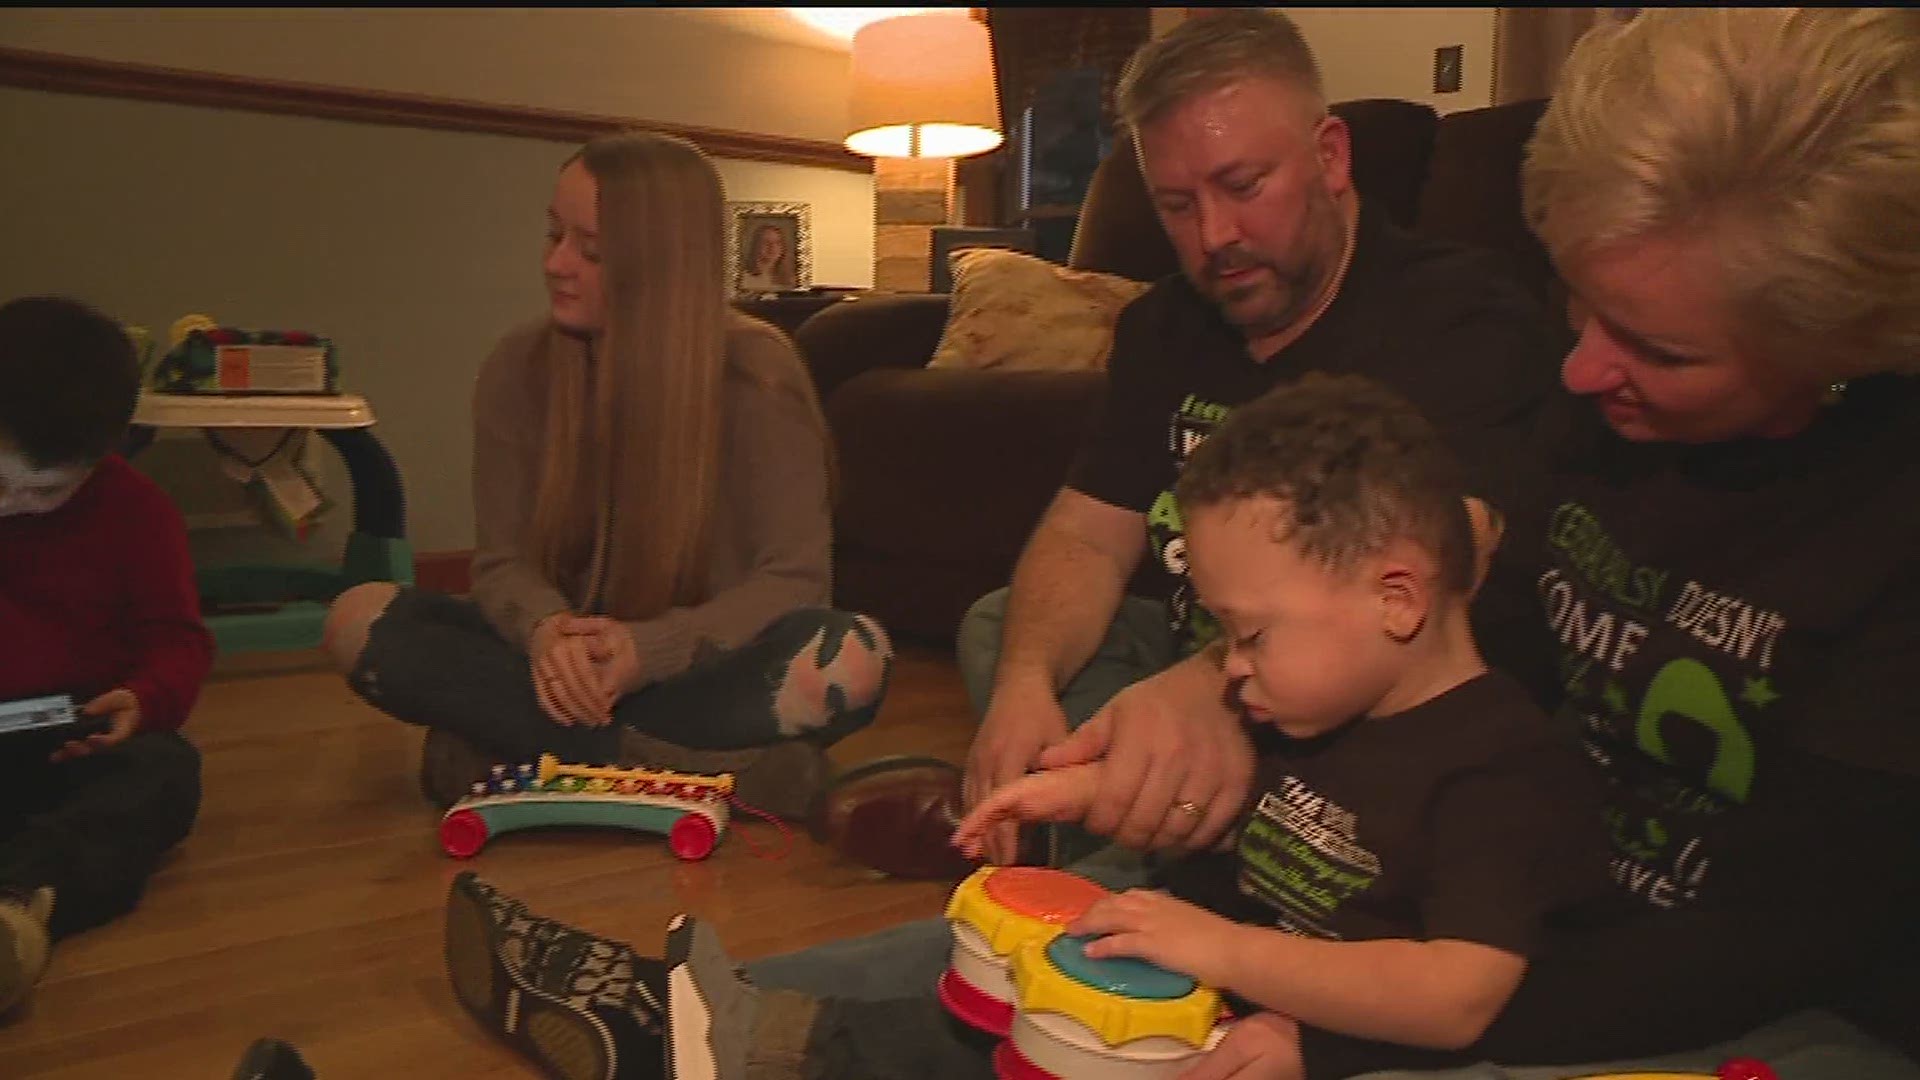 Lance was diagnosed with cerebral palsy a year ago. His family hopes non-FDA approved stem cell treatment for the disease can help him walk and talk